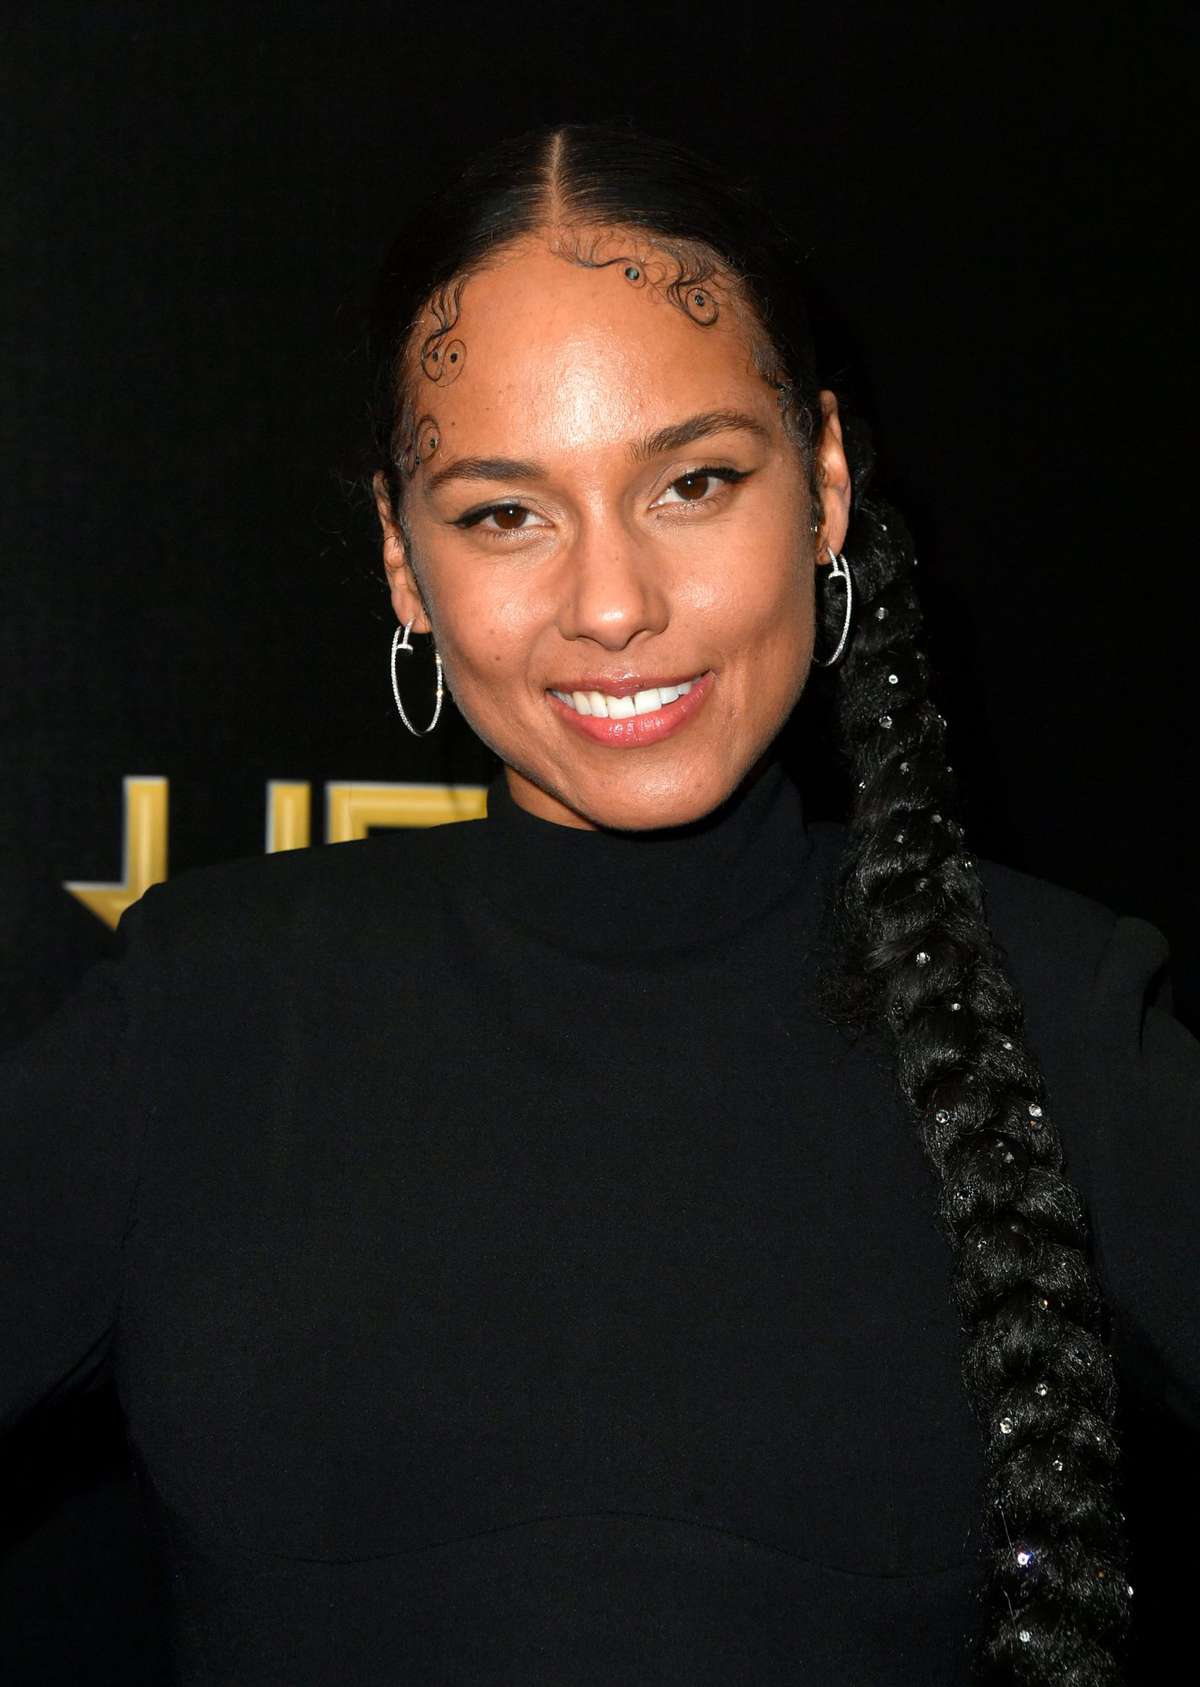 ALL NATURAL/UPDATE: 13 Natural Hairstyles Inspired by the Stars